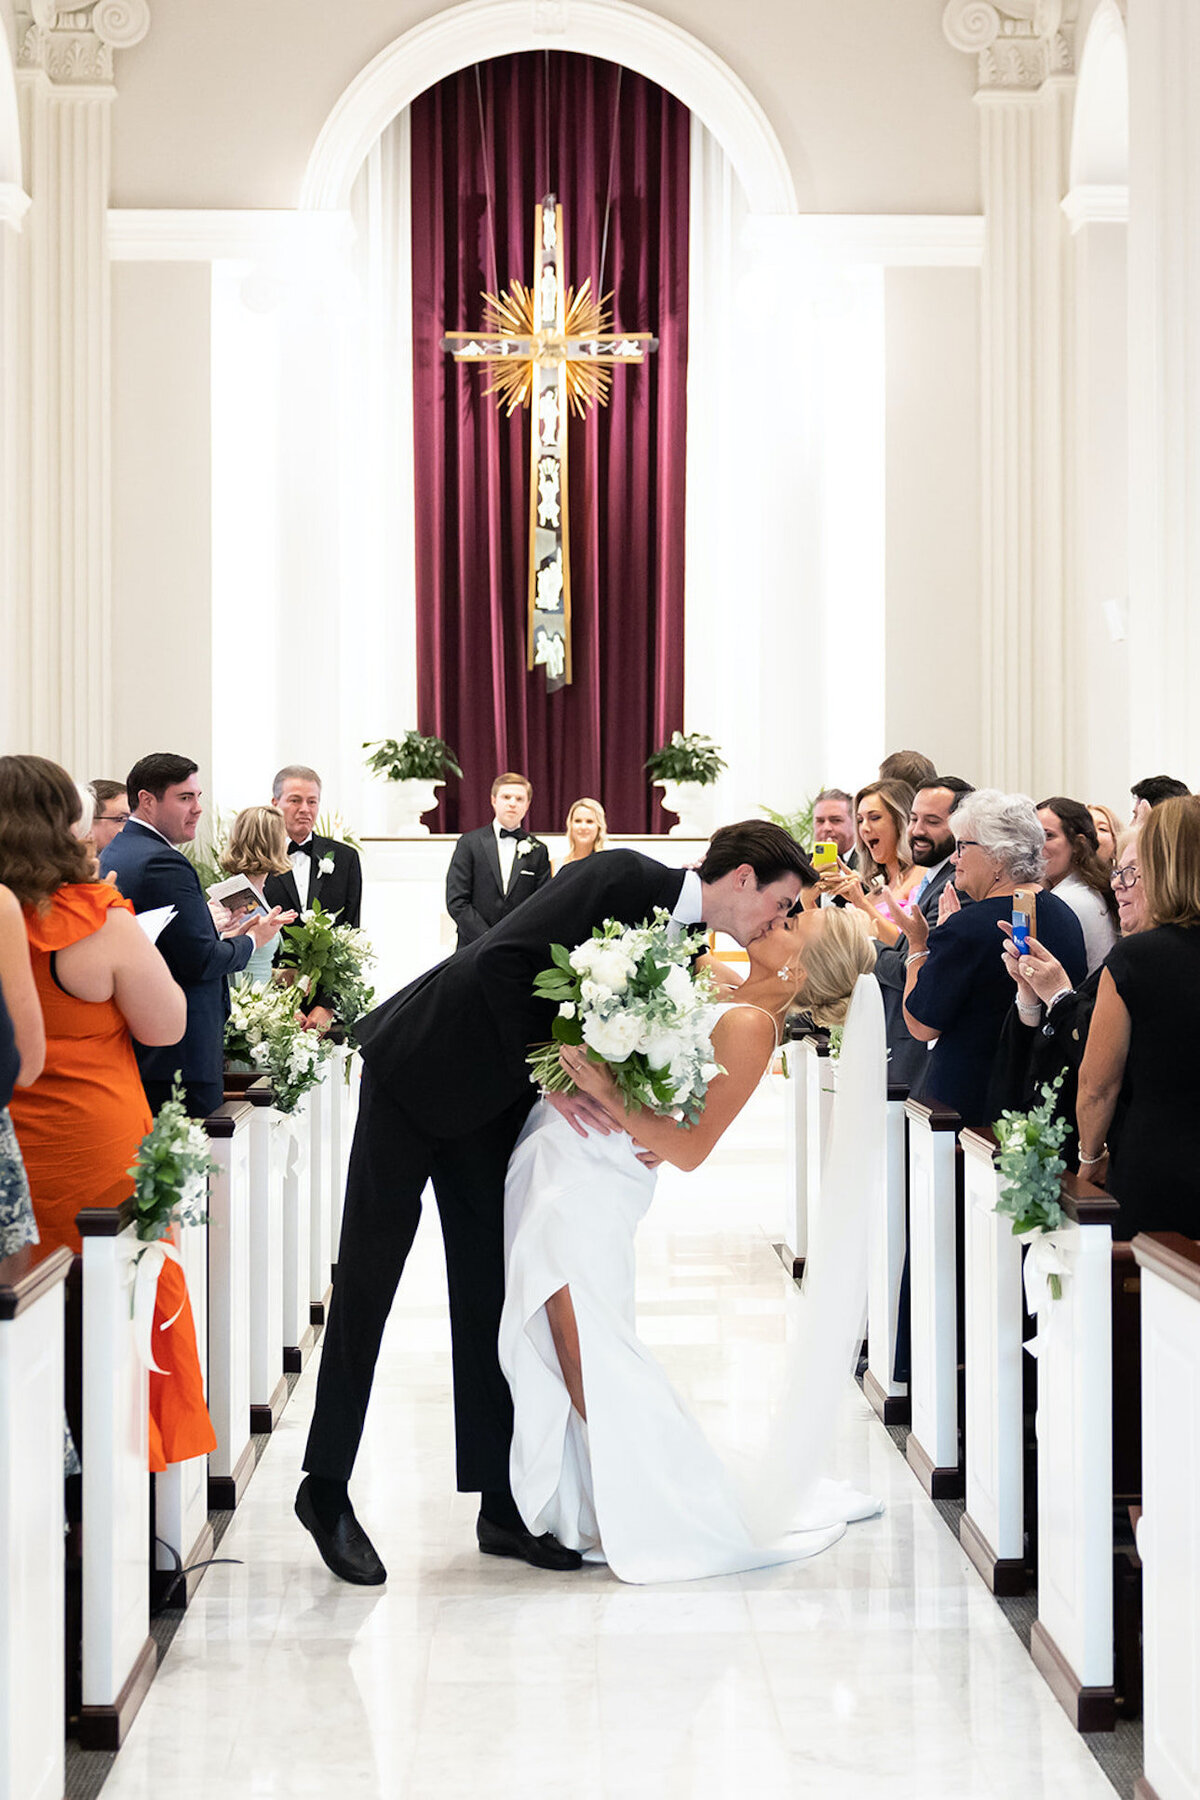 Elise-Connor-American-Institute-of-architects-Wedding-The-finer-points-event-planning-genevieve-leiper-photography00022